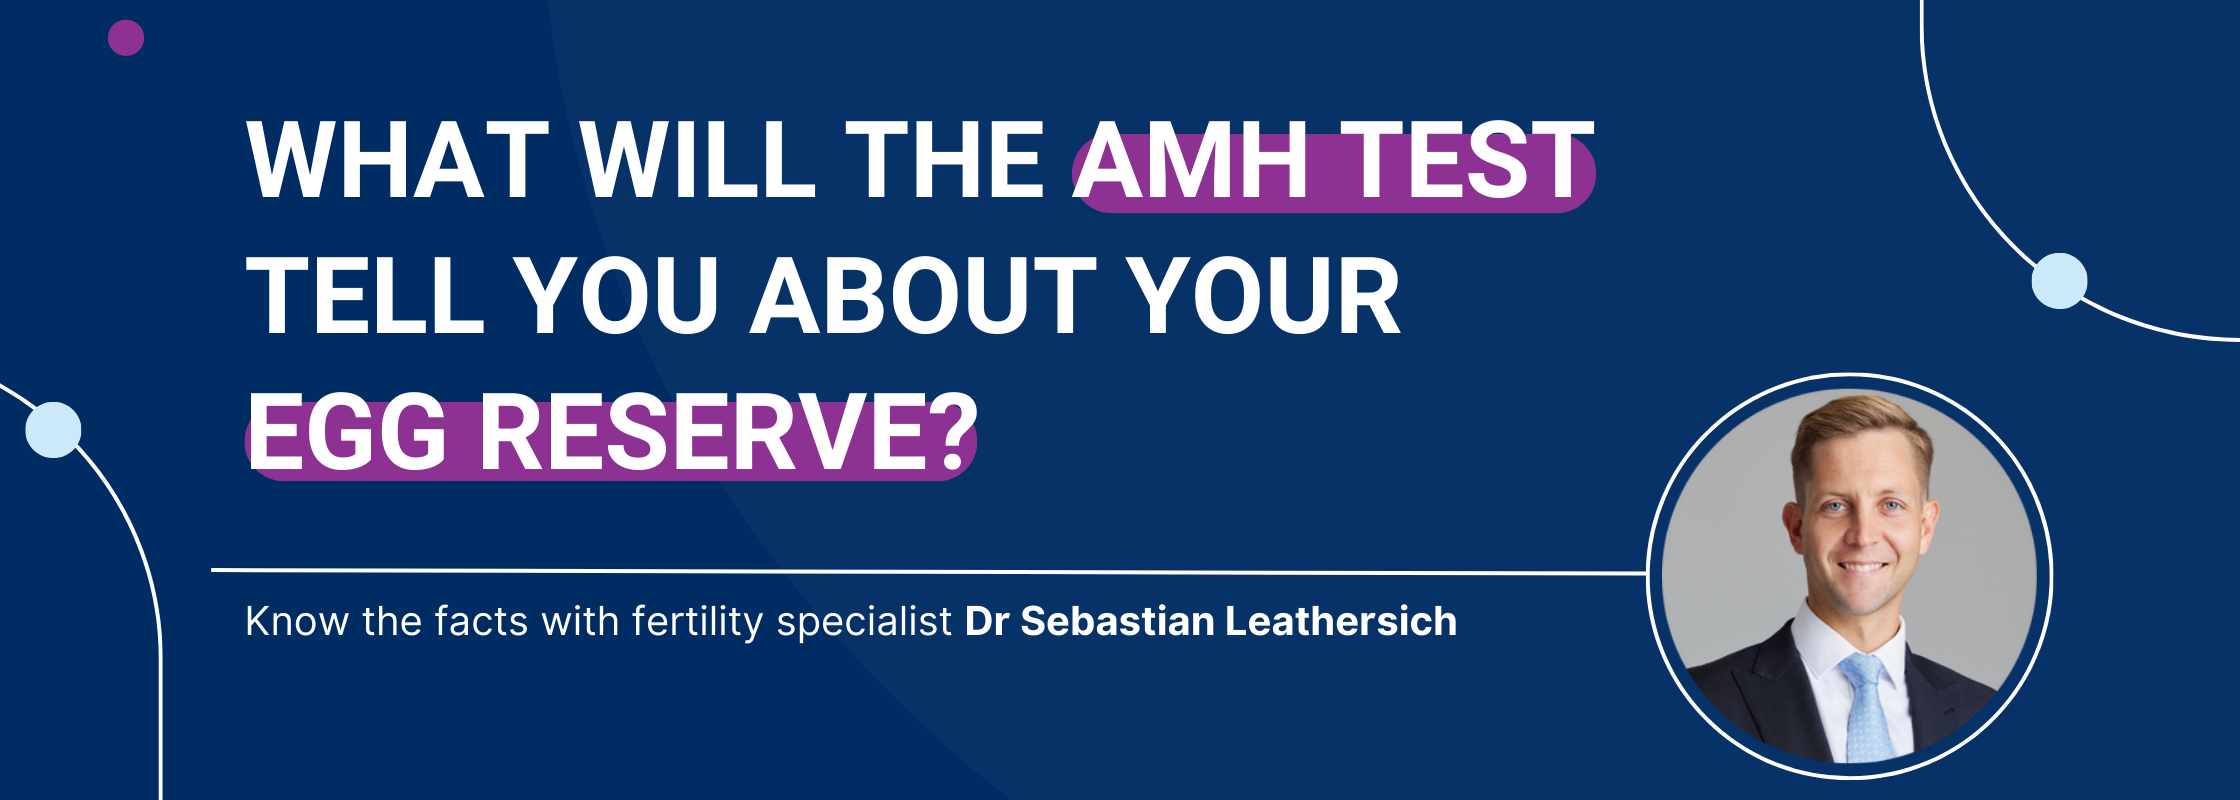 Featured image for “Anti-Mullerian Hormone (AMH) Test and Ovarian Reserve.”